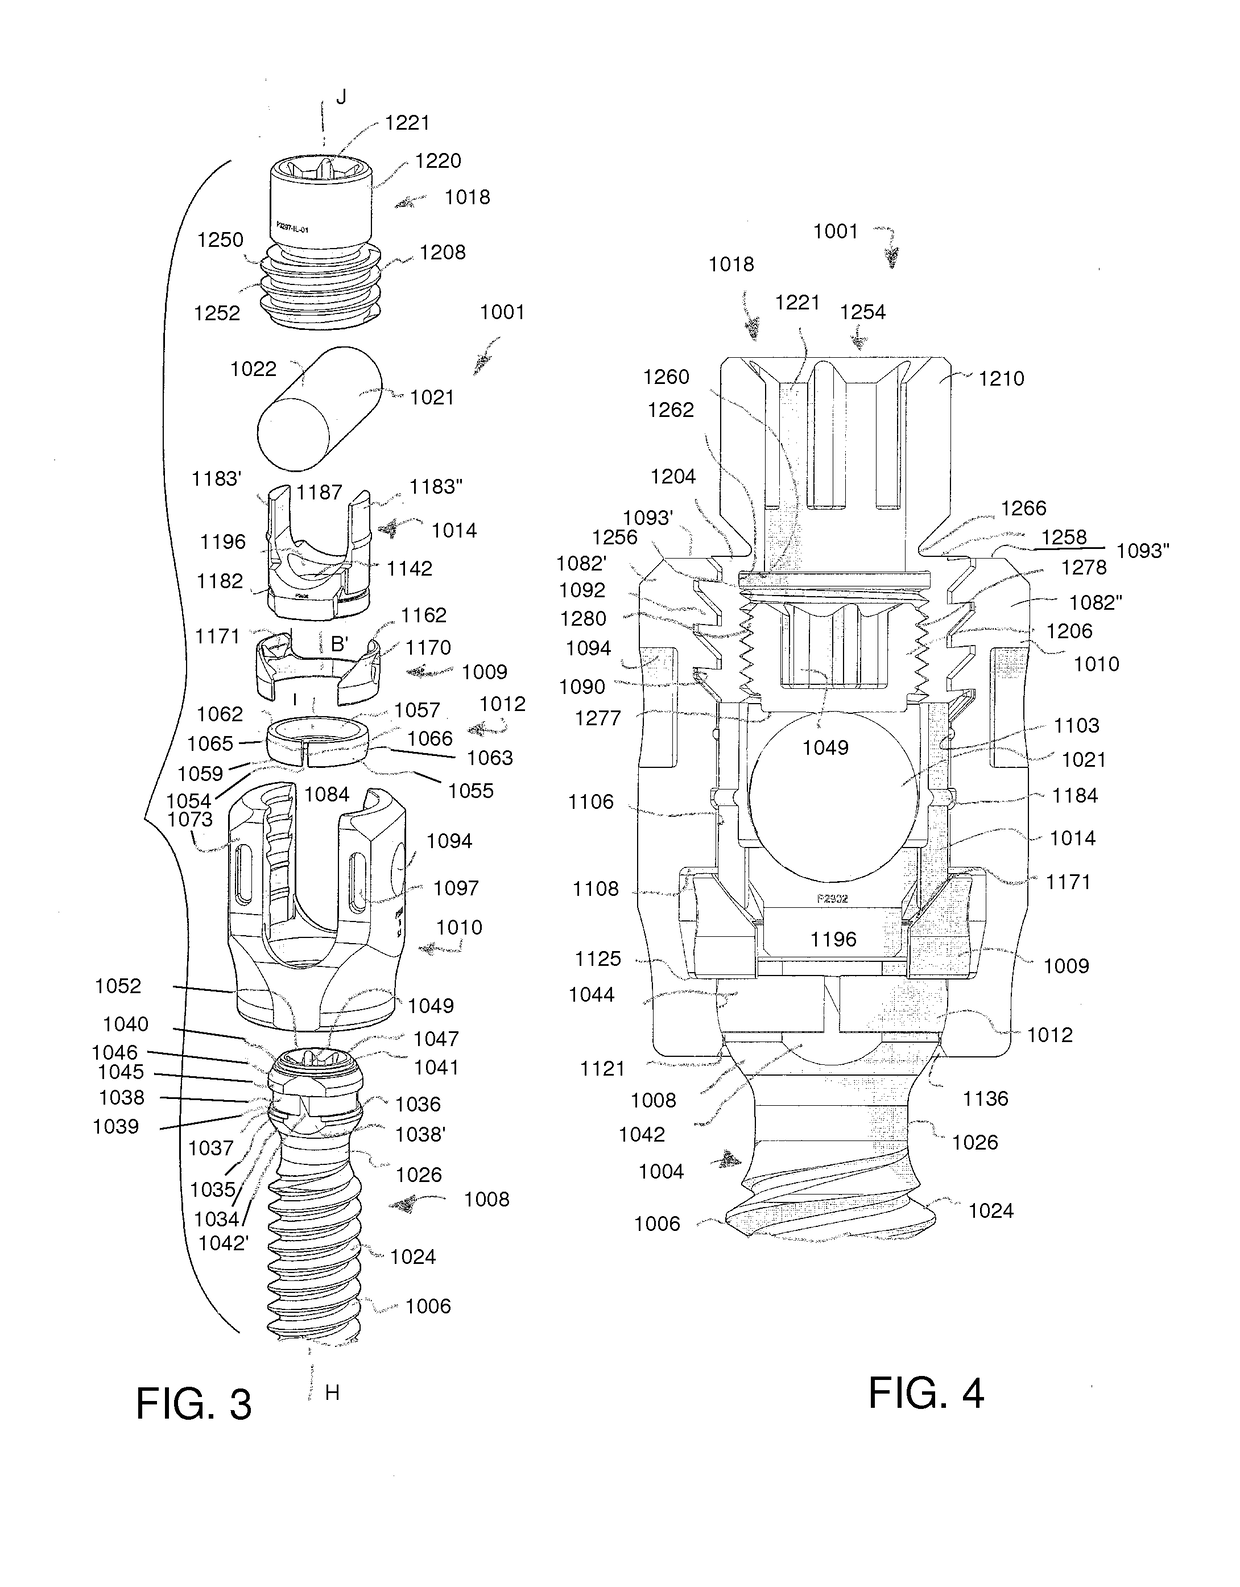 Snap-on multi-planar and mono-planar receiver assemblies having integral and multi-part multipurpose positioners for pivoting and non-pivoting retainers